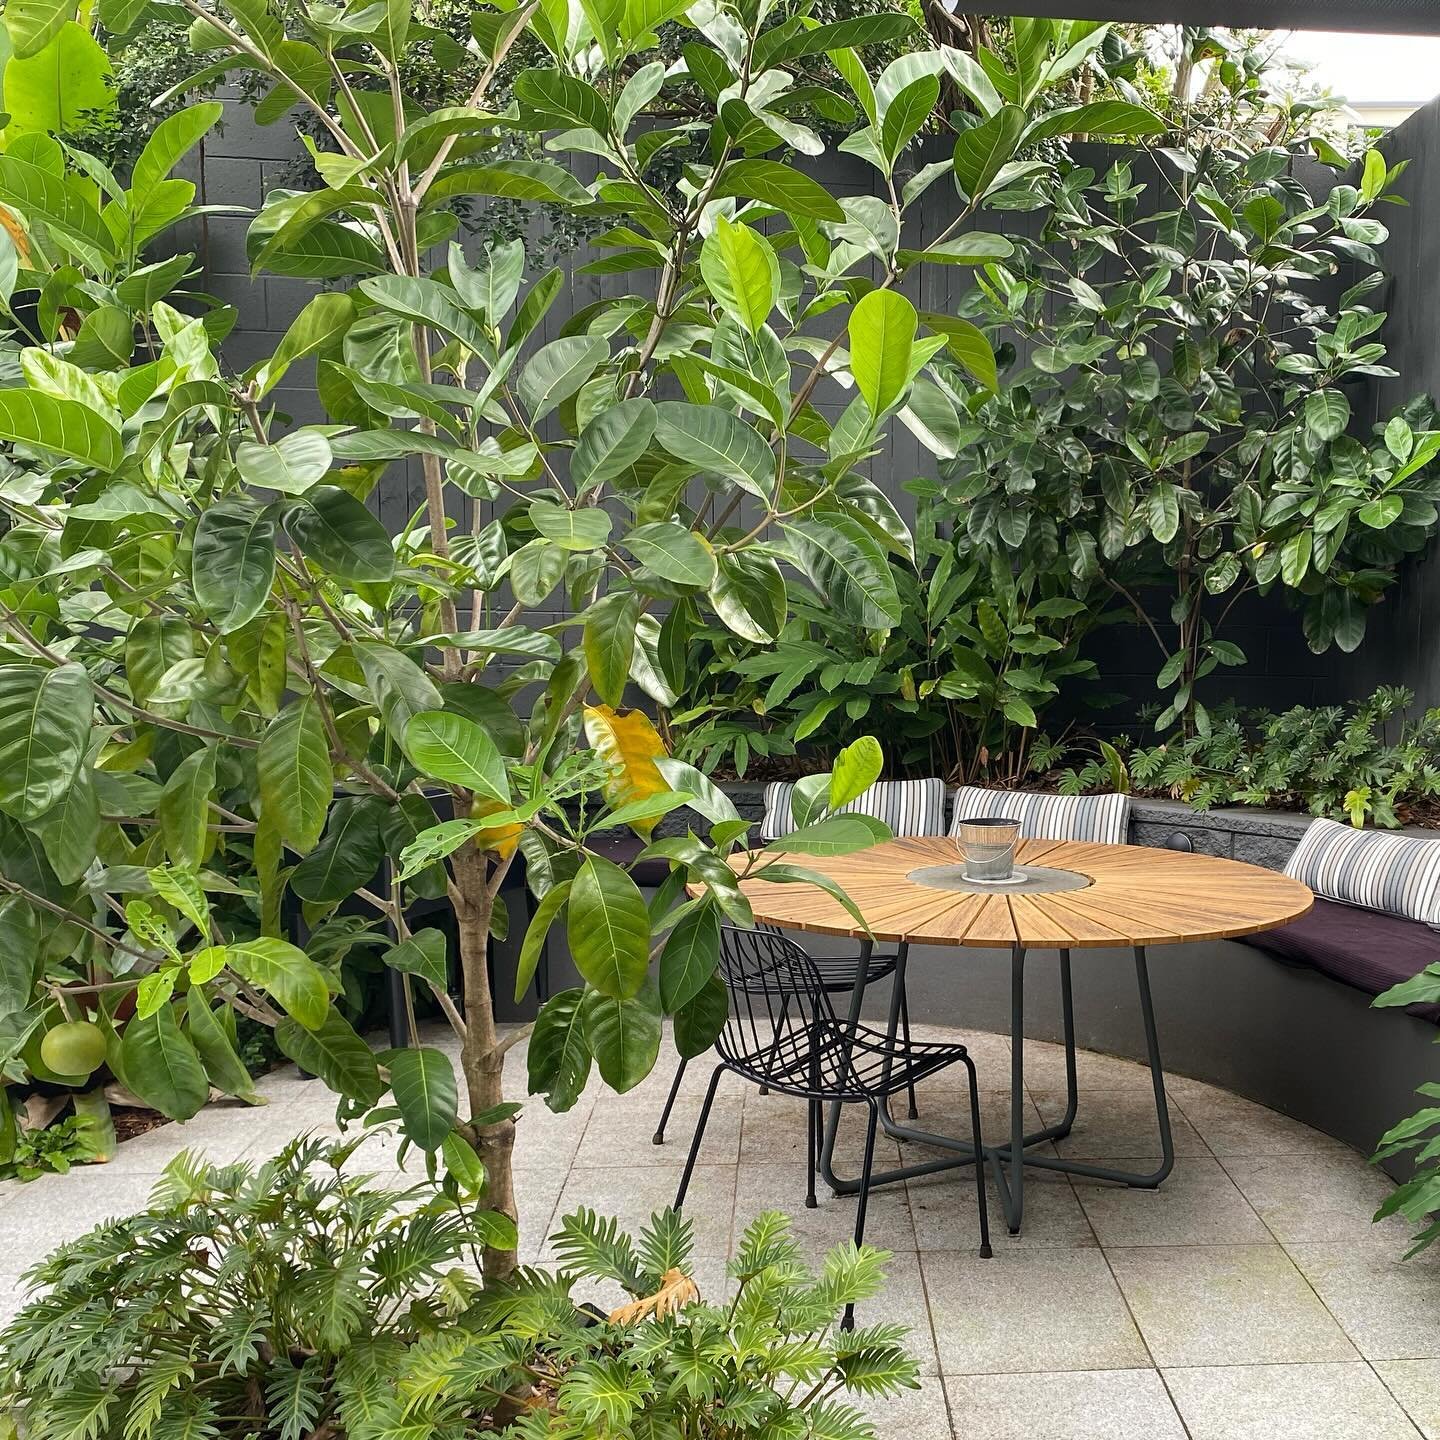 Before and after: We turned this ugly corner of the garden into a lovely outdoor dining area by paving, adding built in seating in front of an existing retaining wall, rejuvenating and painting fences one colour and planting with a lush subtropical g